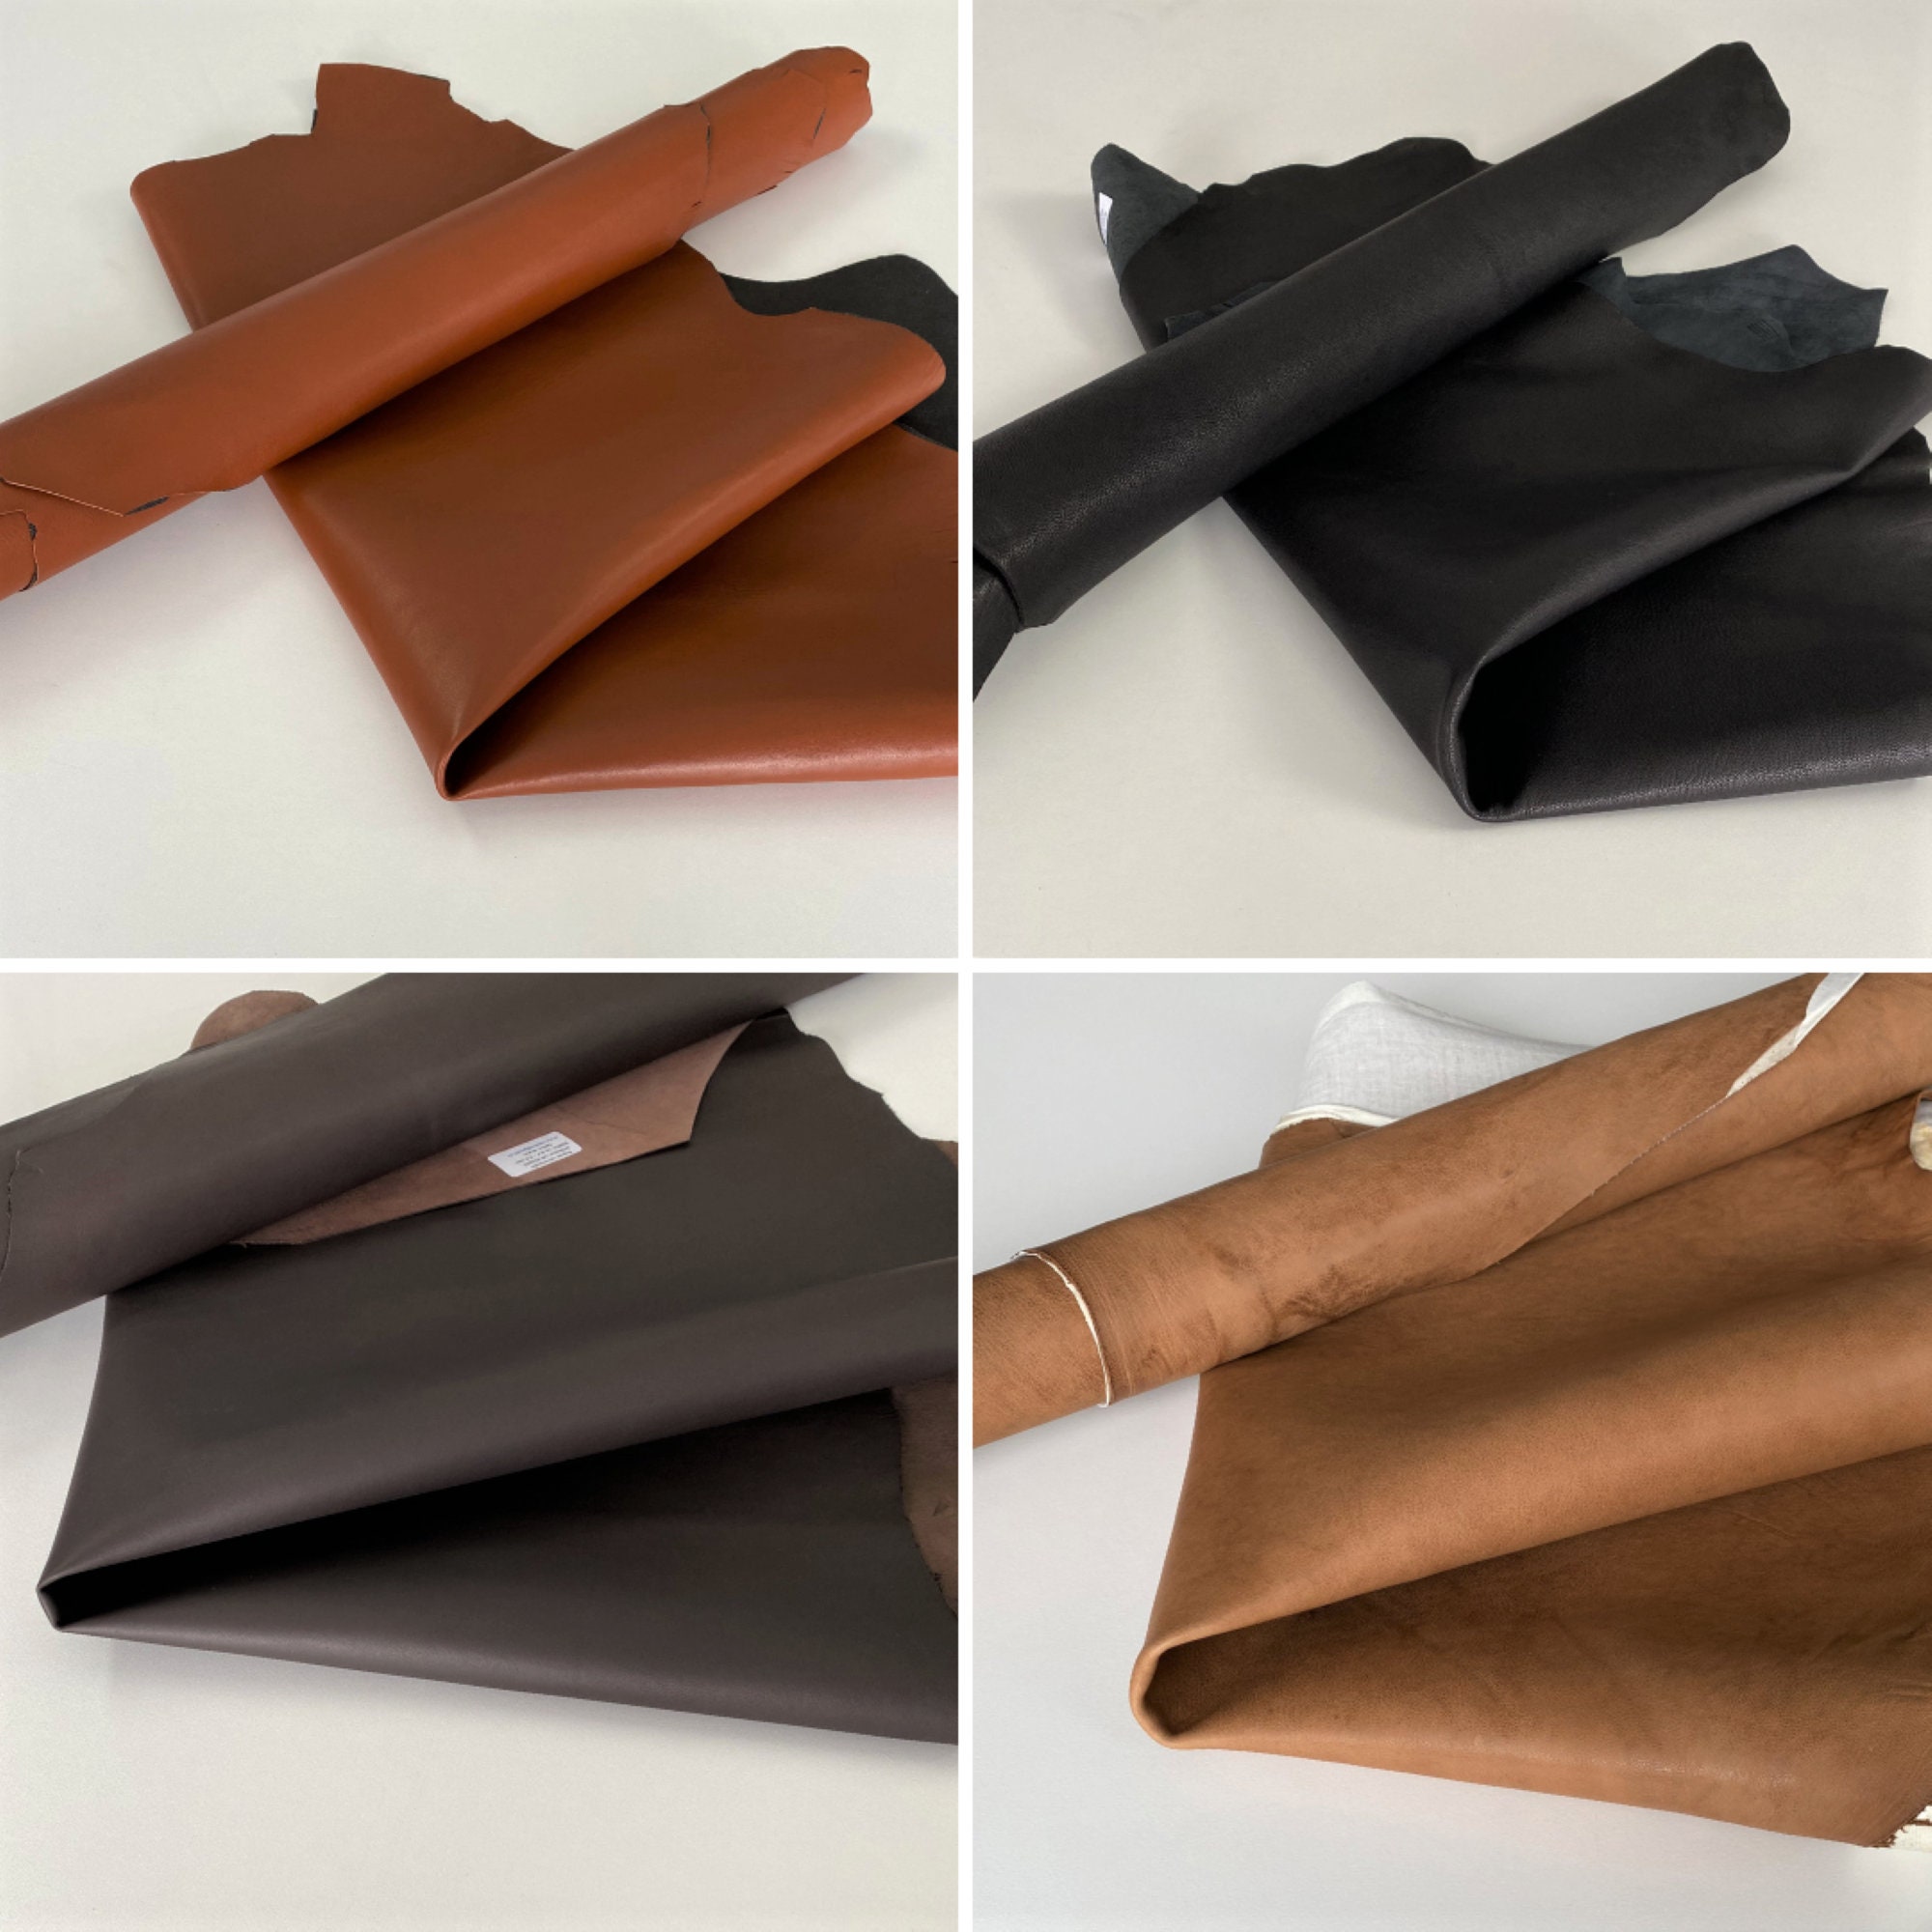  Genuine Cow Leather Sheets Remnants Scraps Hides Tooling  Leather for Crafts Soft Raw Leather 11-12 Oz Pack (Brown)